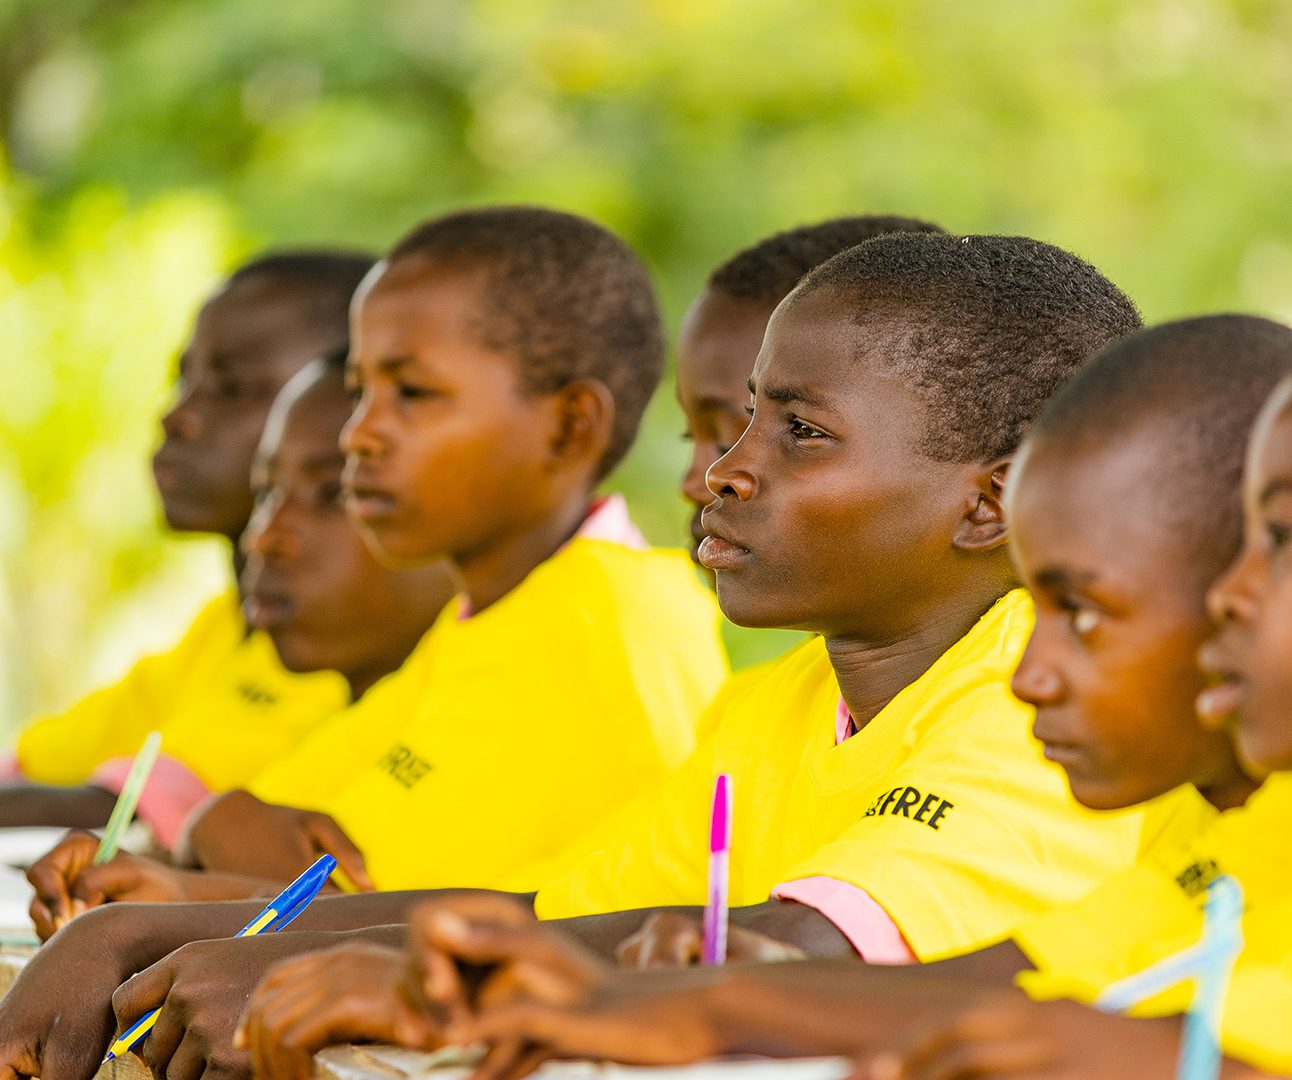 A row of Kenyan school children are sitting at a desk in yellow t-shirts with the Born Free logo